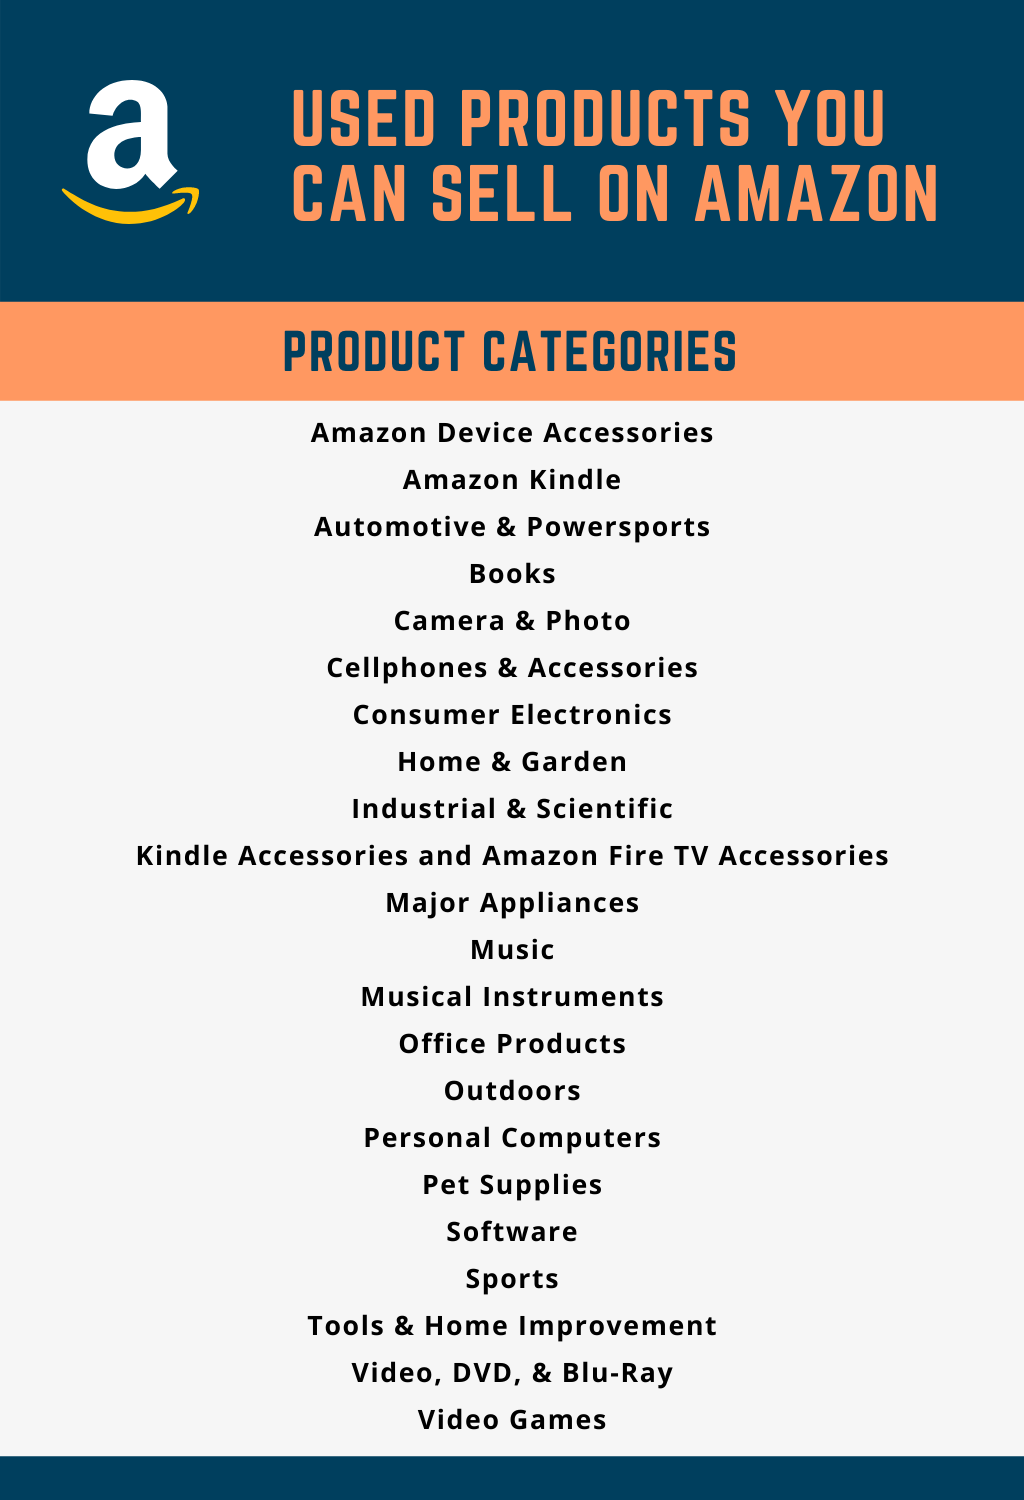 https://capforge.com/wp-content/uploads/2022/02/Used-Items-Category-Table-Amazon-.png